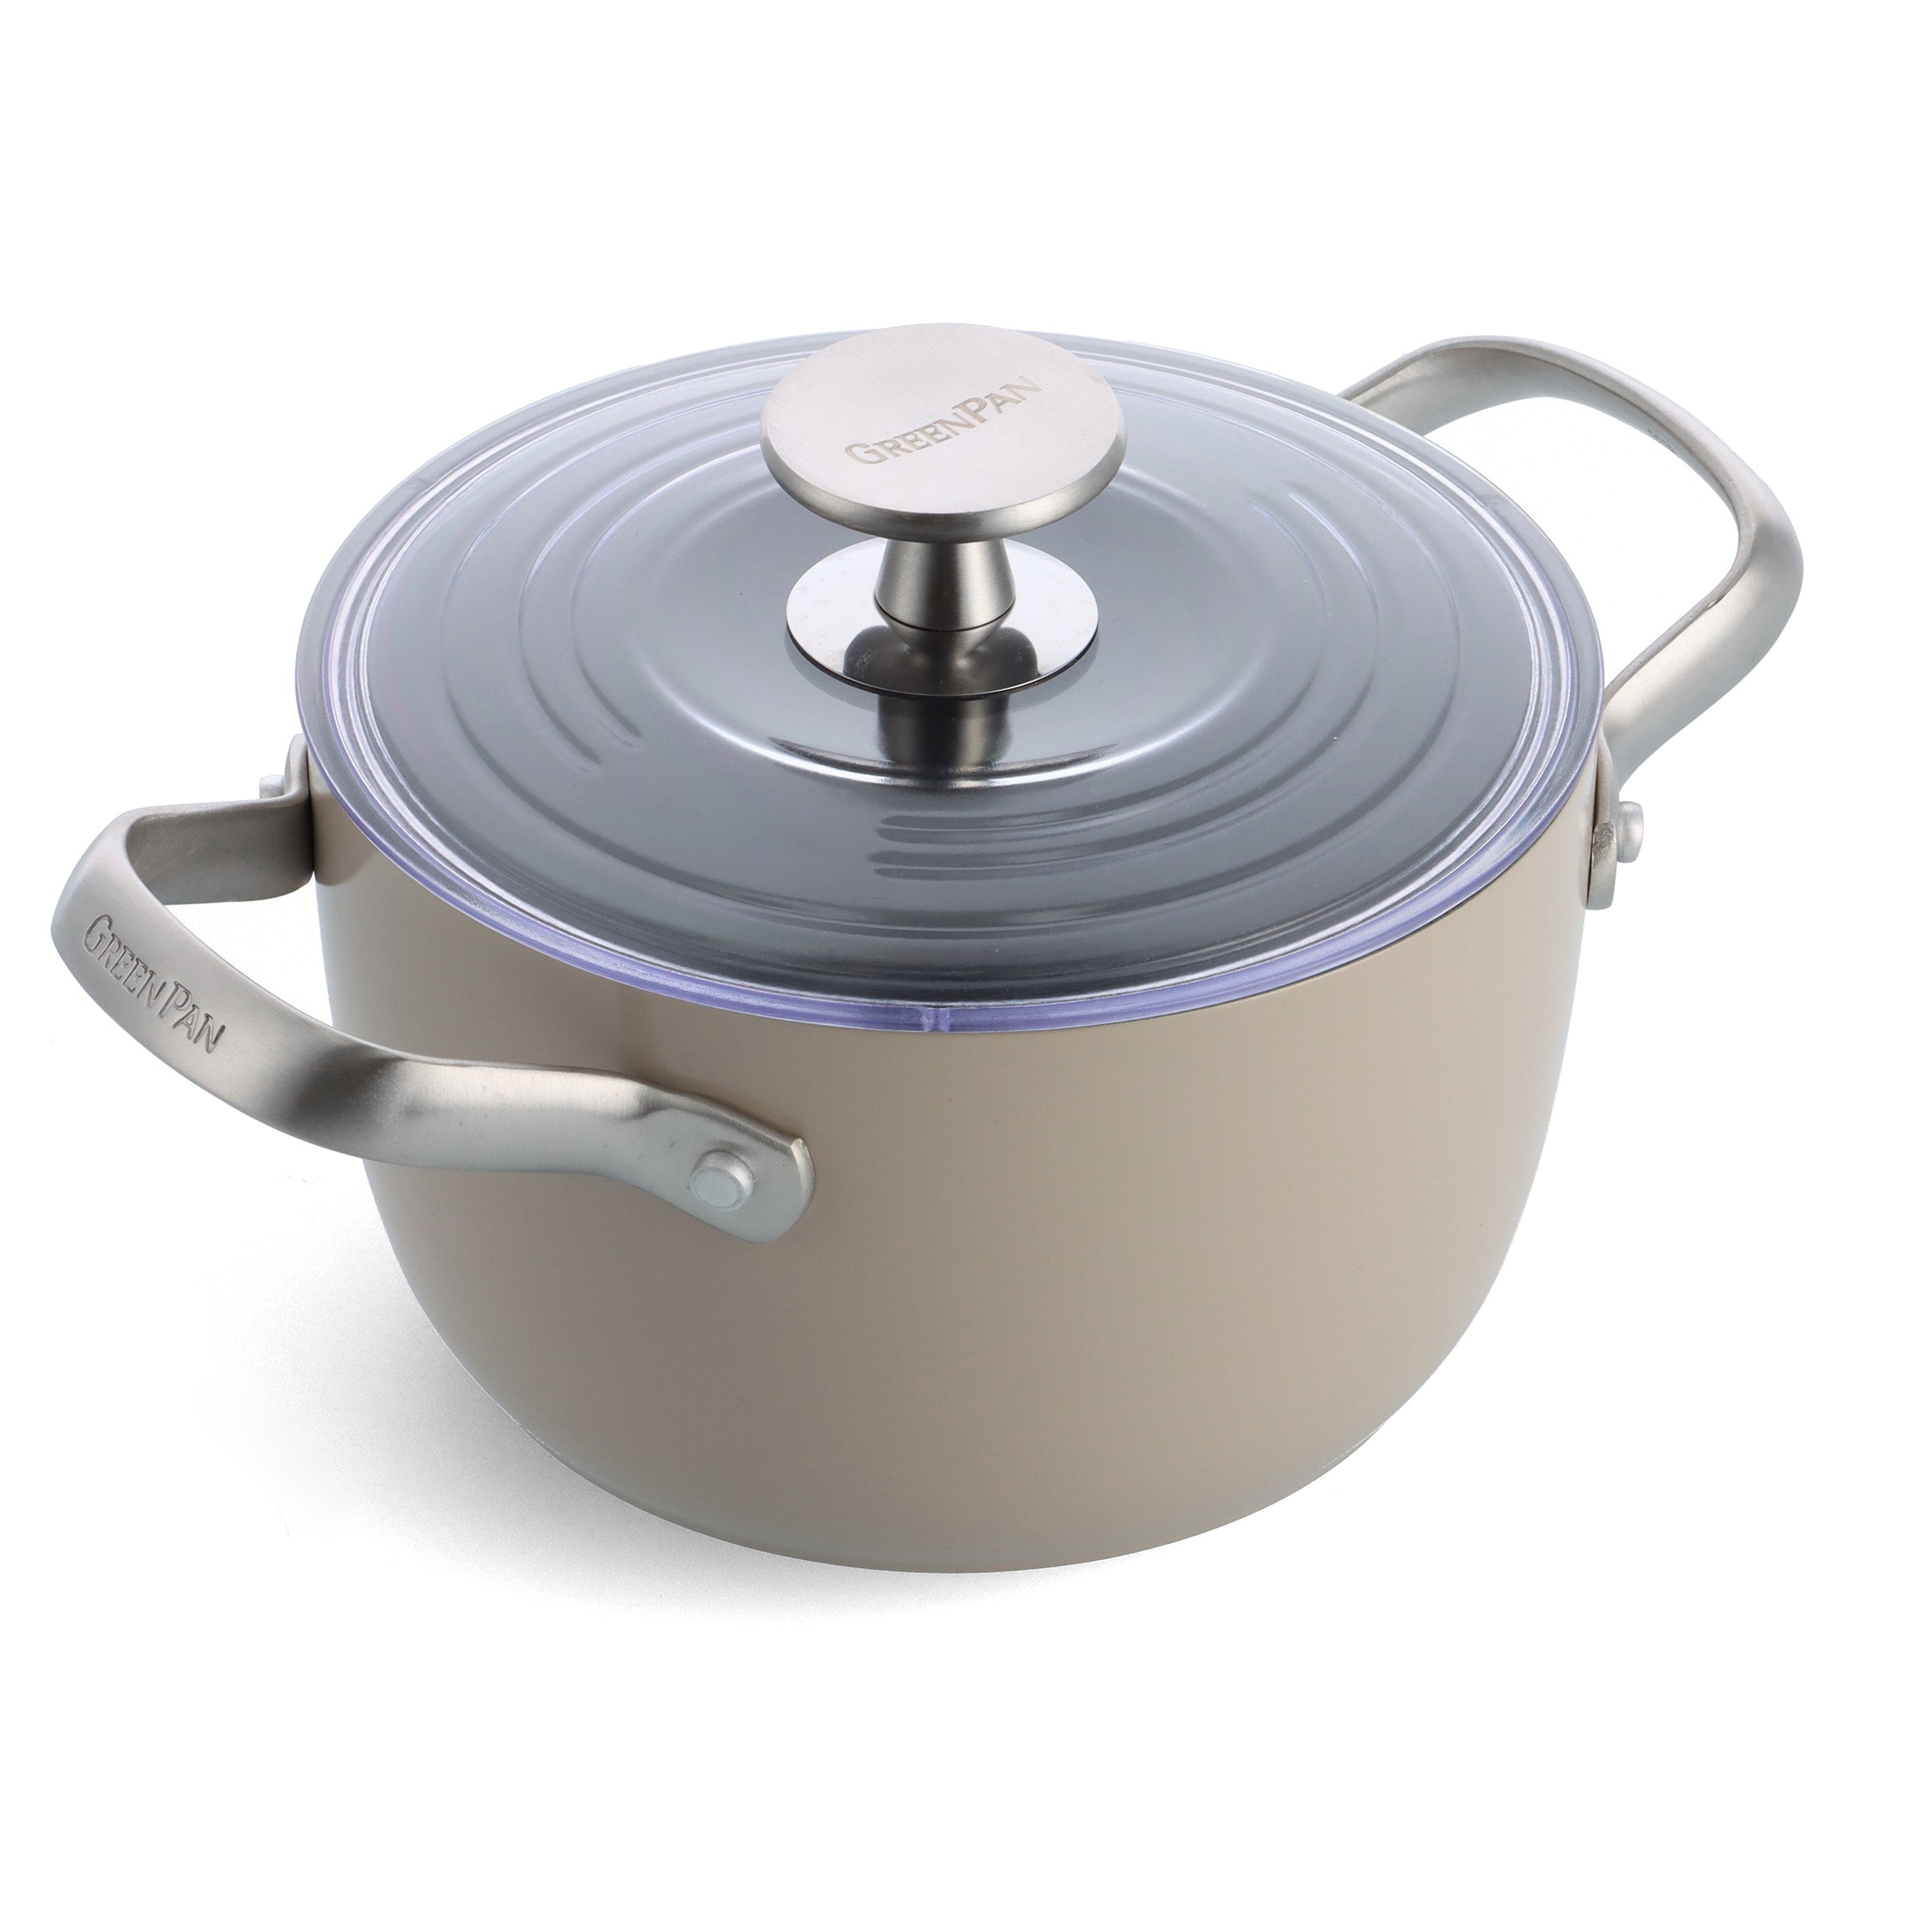 GreenPan 2-Quart Rice and Grains Cooker, Taupe